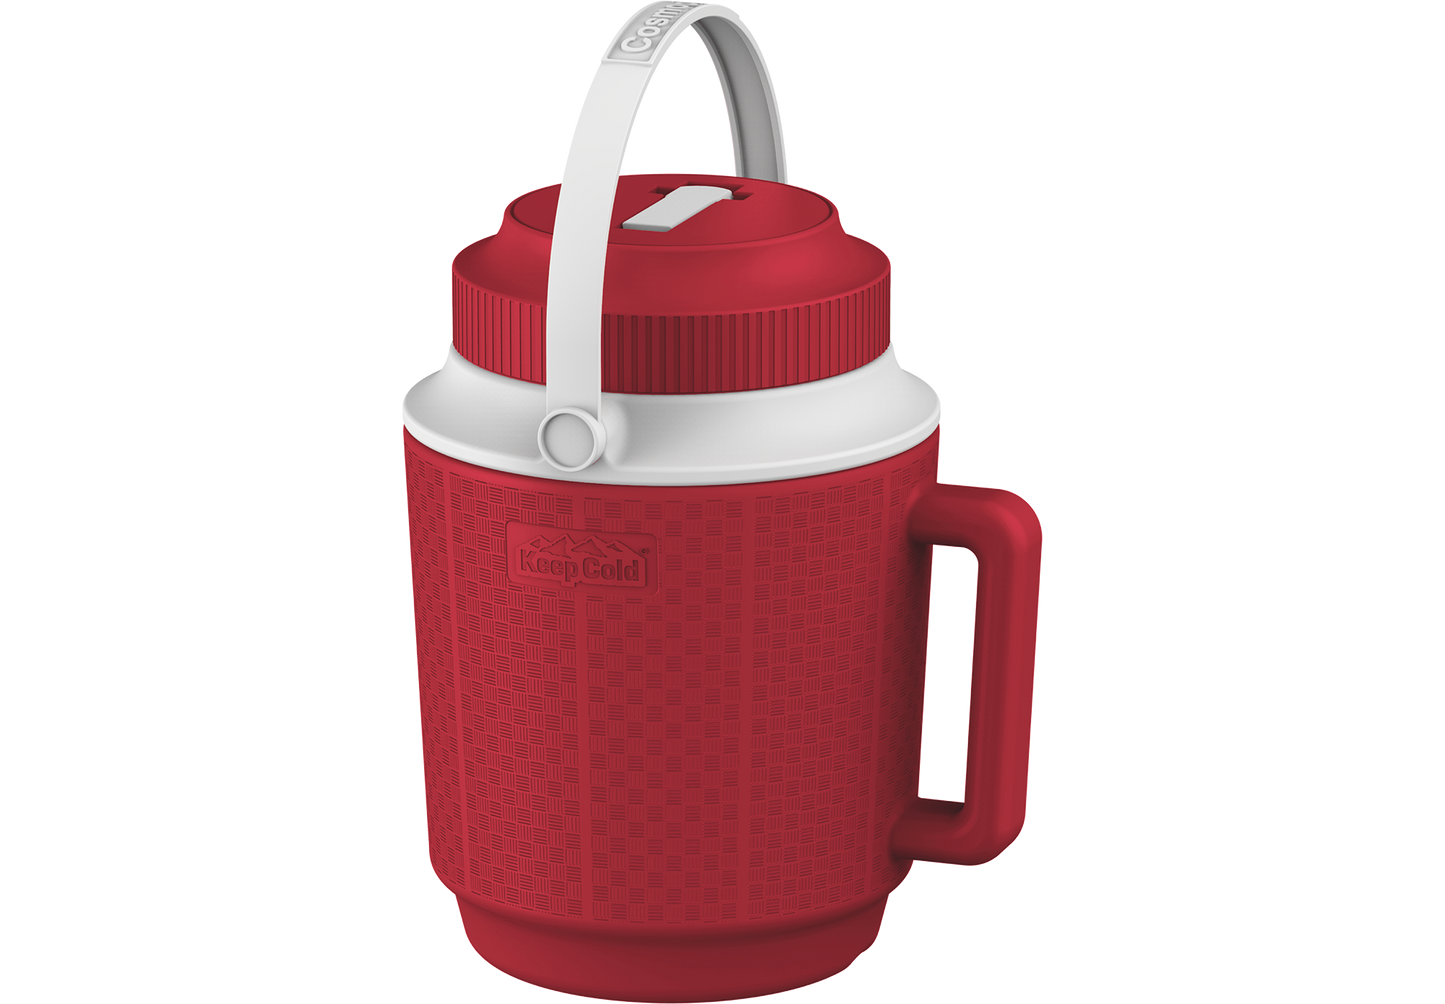 1/2 gallon keepcold water cooler red